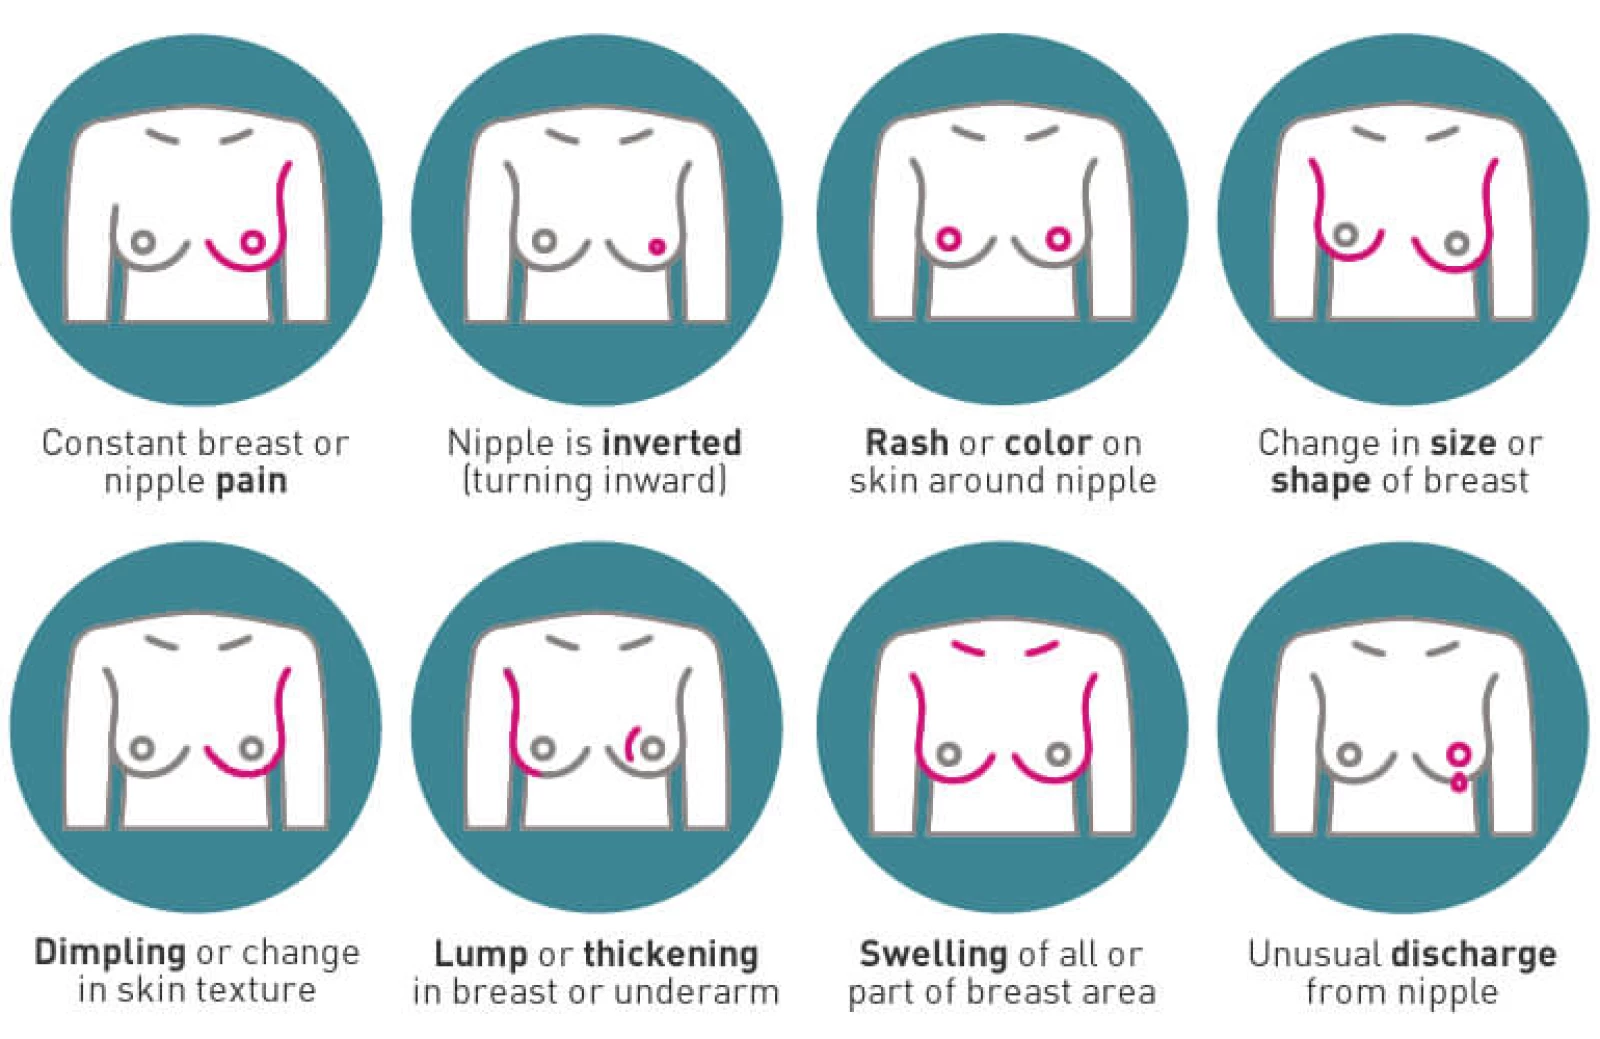 How to check breasts for signs of cancer